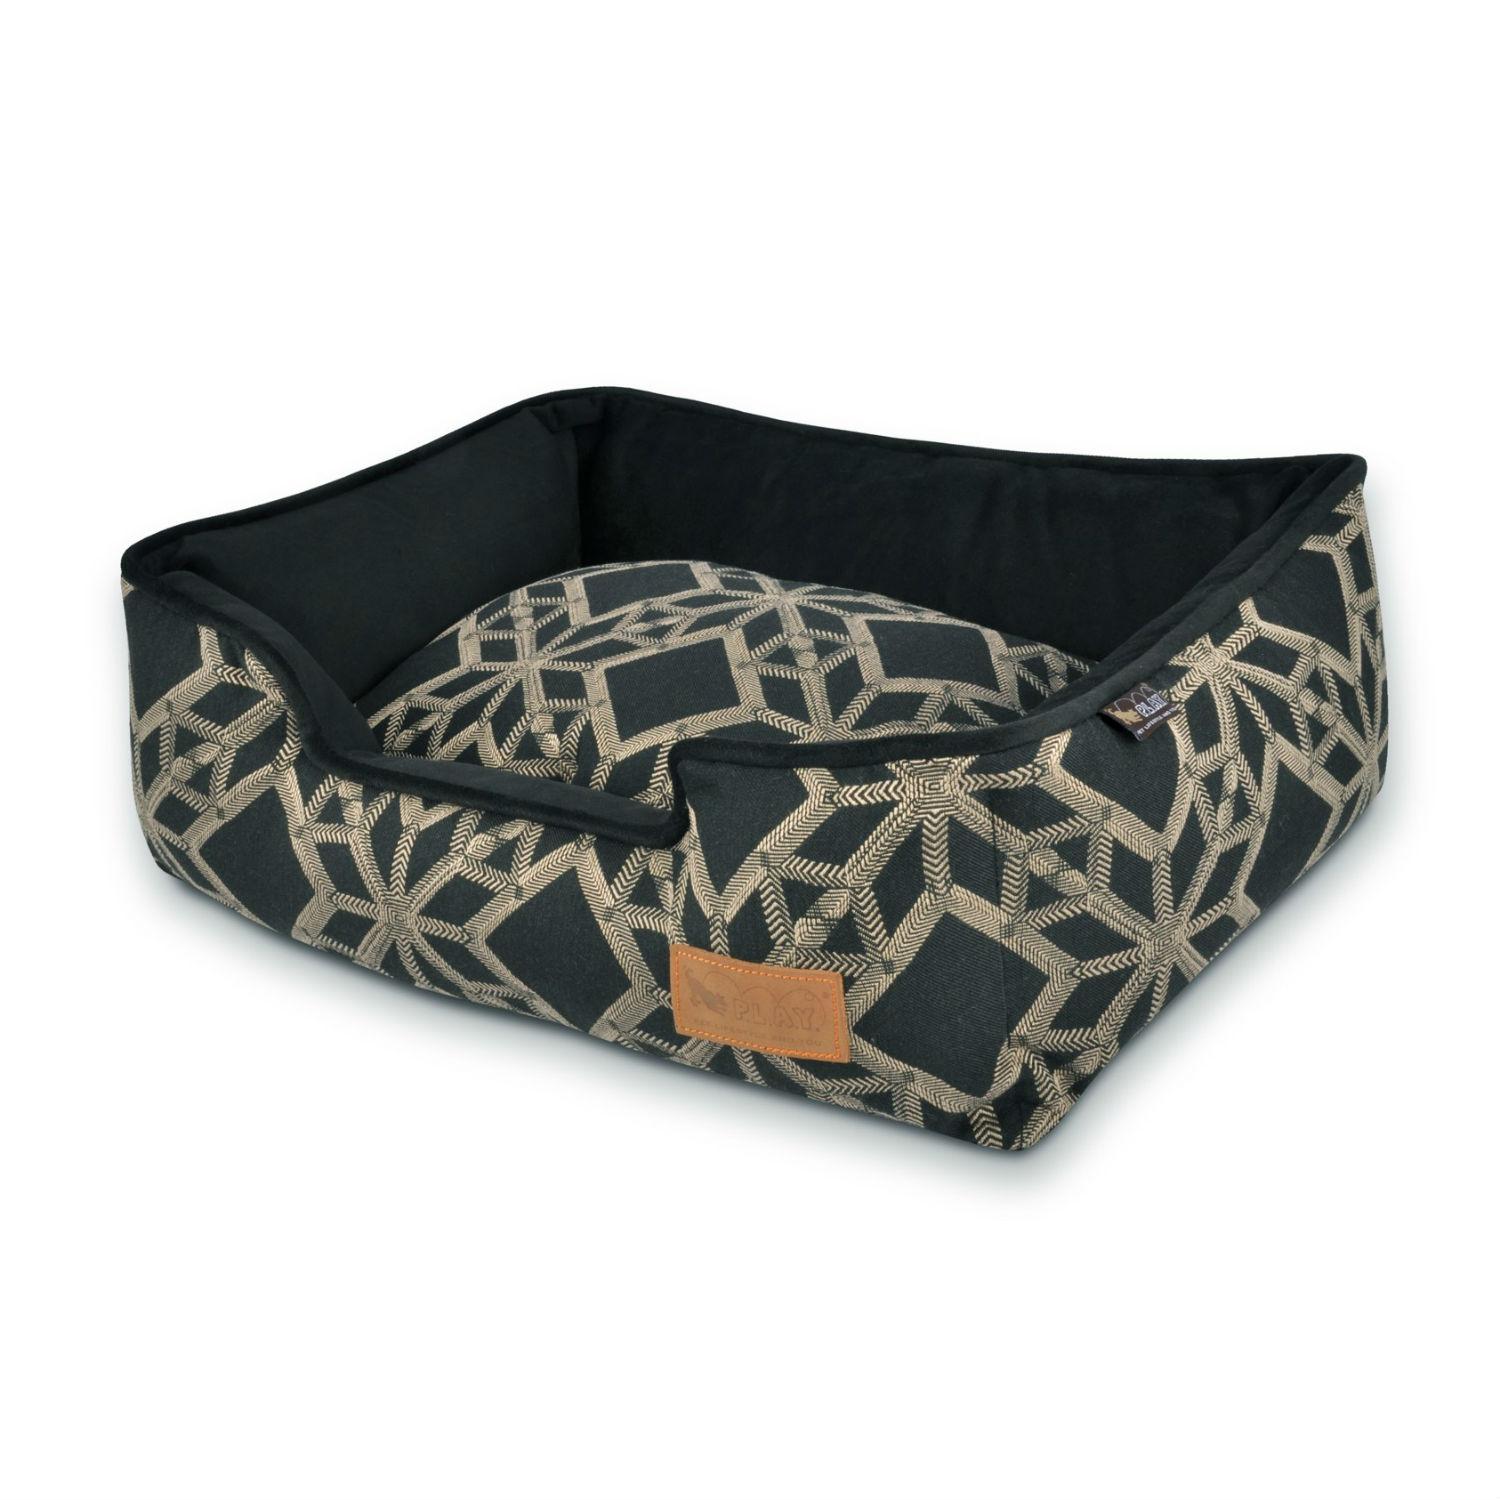 P.L.A.Y. Solstice Lounge Dog Bed - Stormy Night